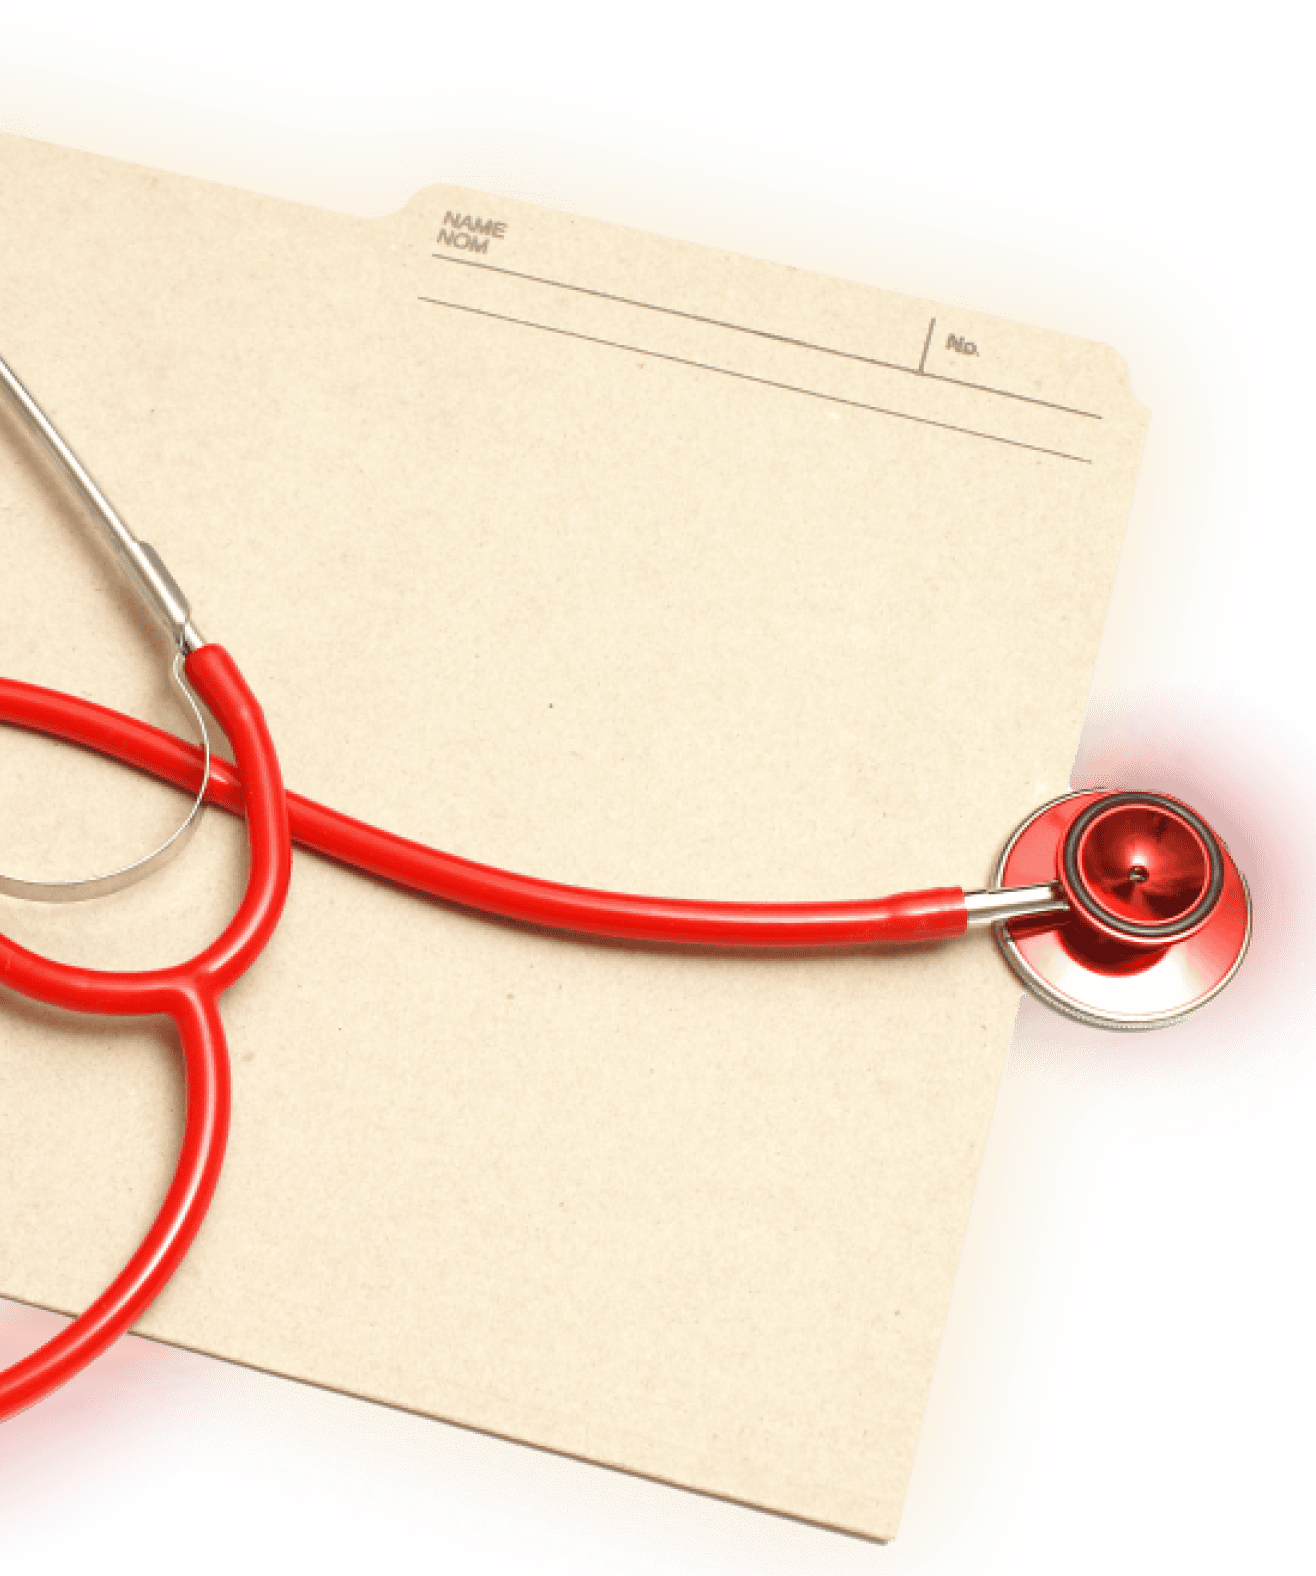 A red stethoscope rests on a blank medical folder, which has sections labeled "Name" and "No." at the top.